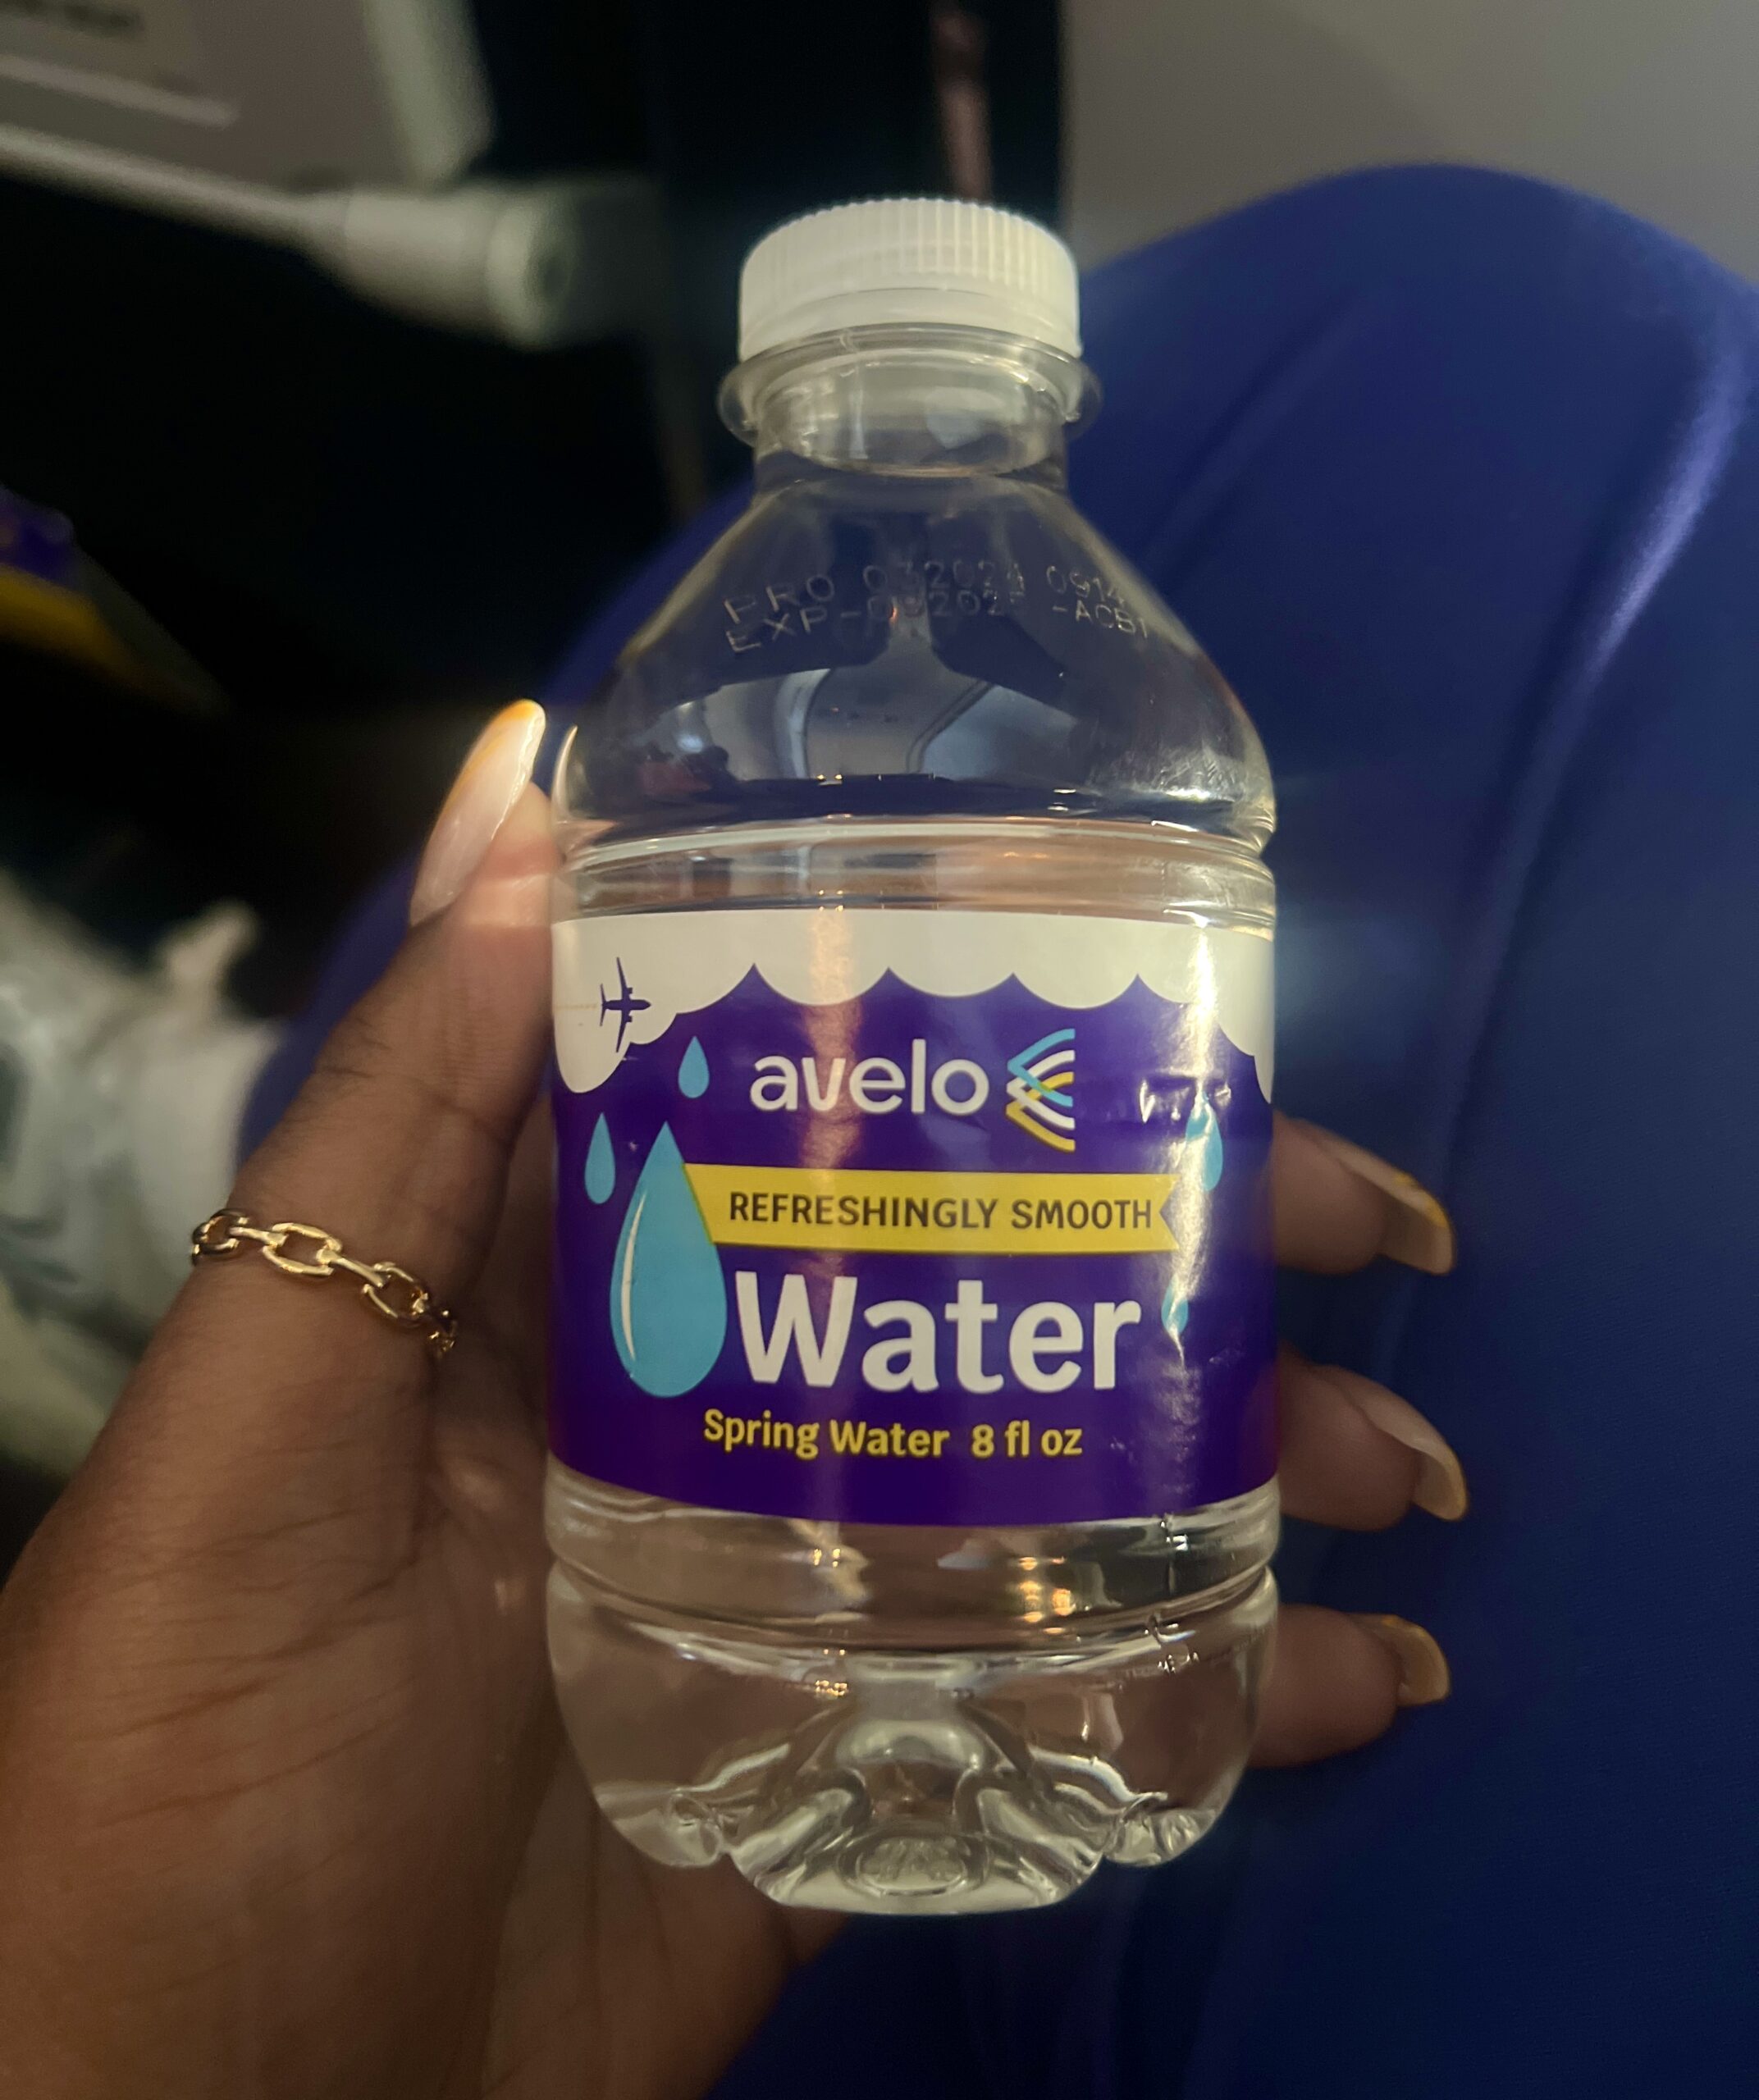 A bottle of water with Avelo Airlines branding 